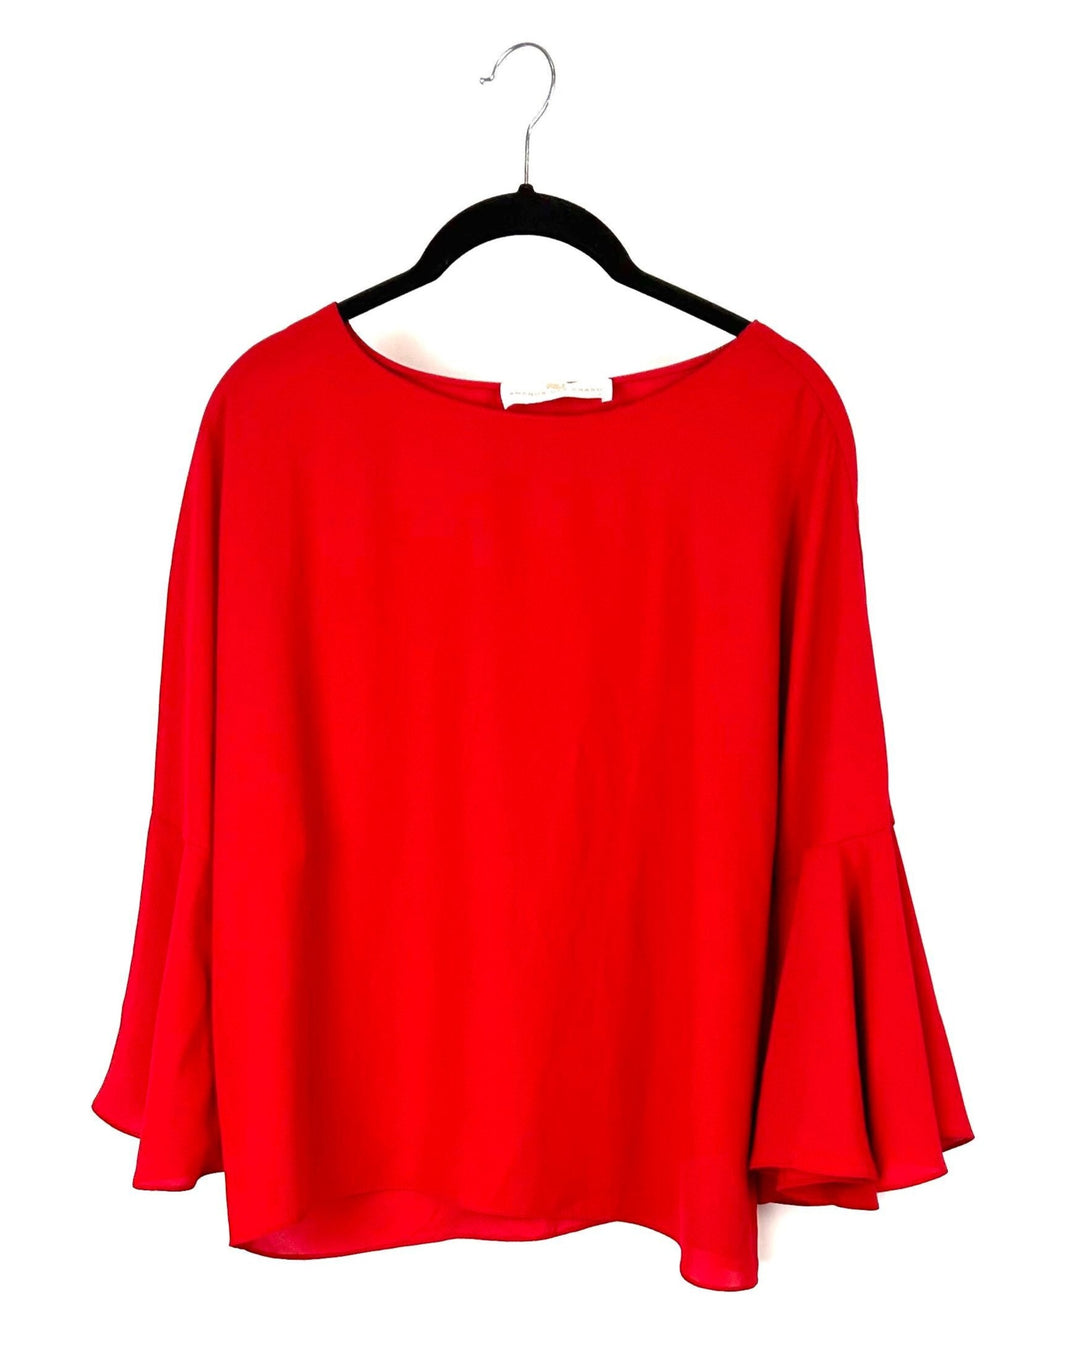 Red Bell Sleeve Blouse - Size 4/6